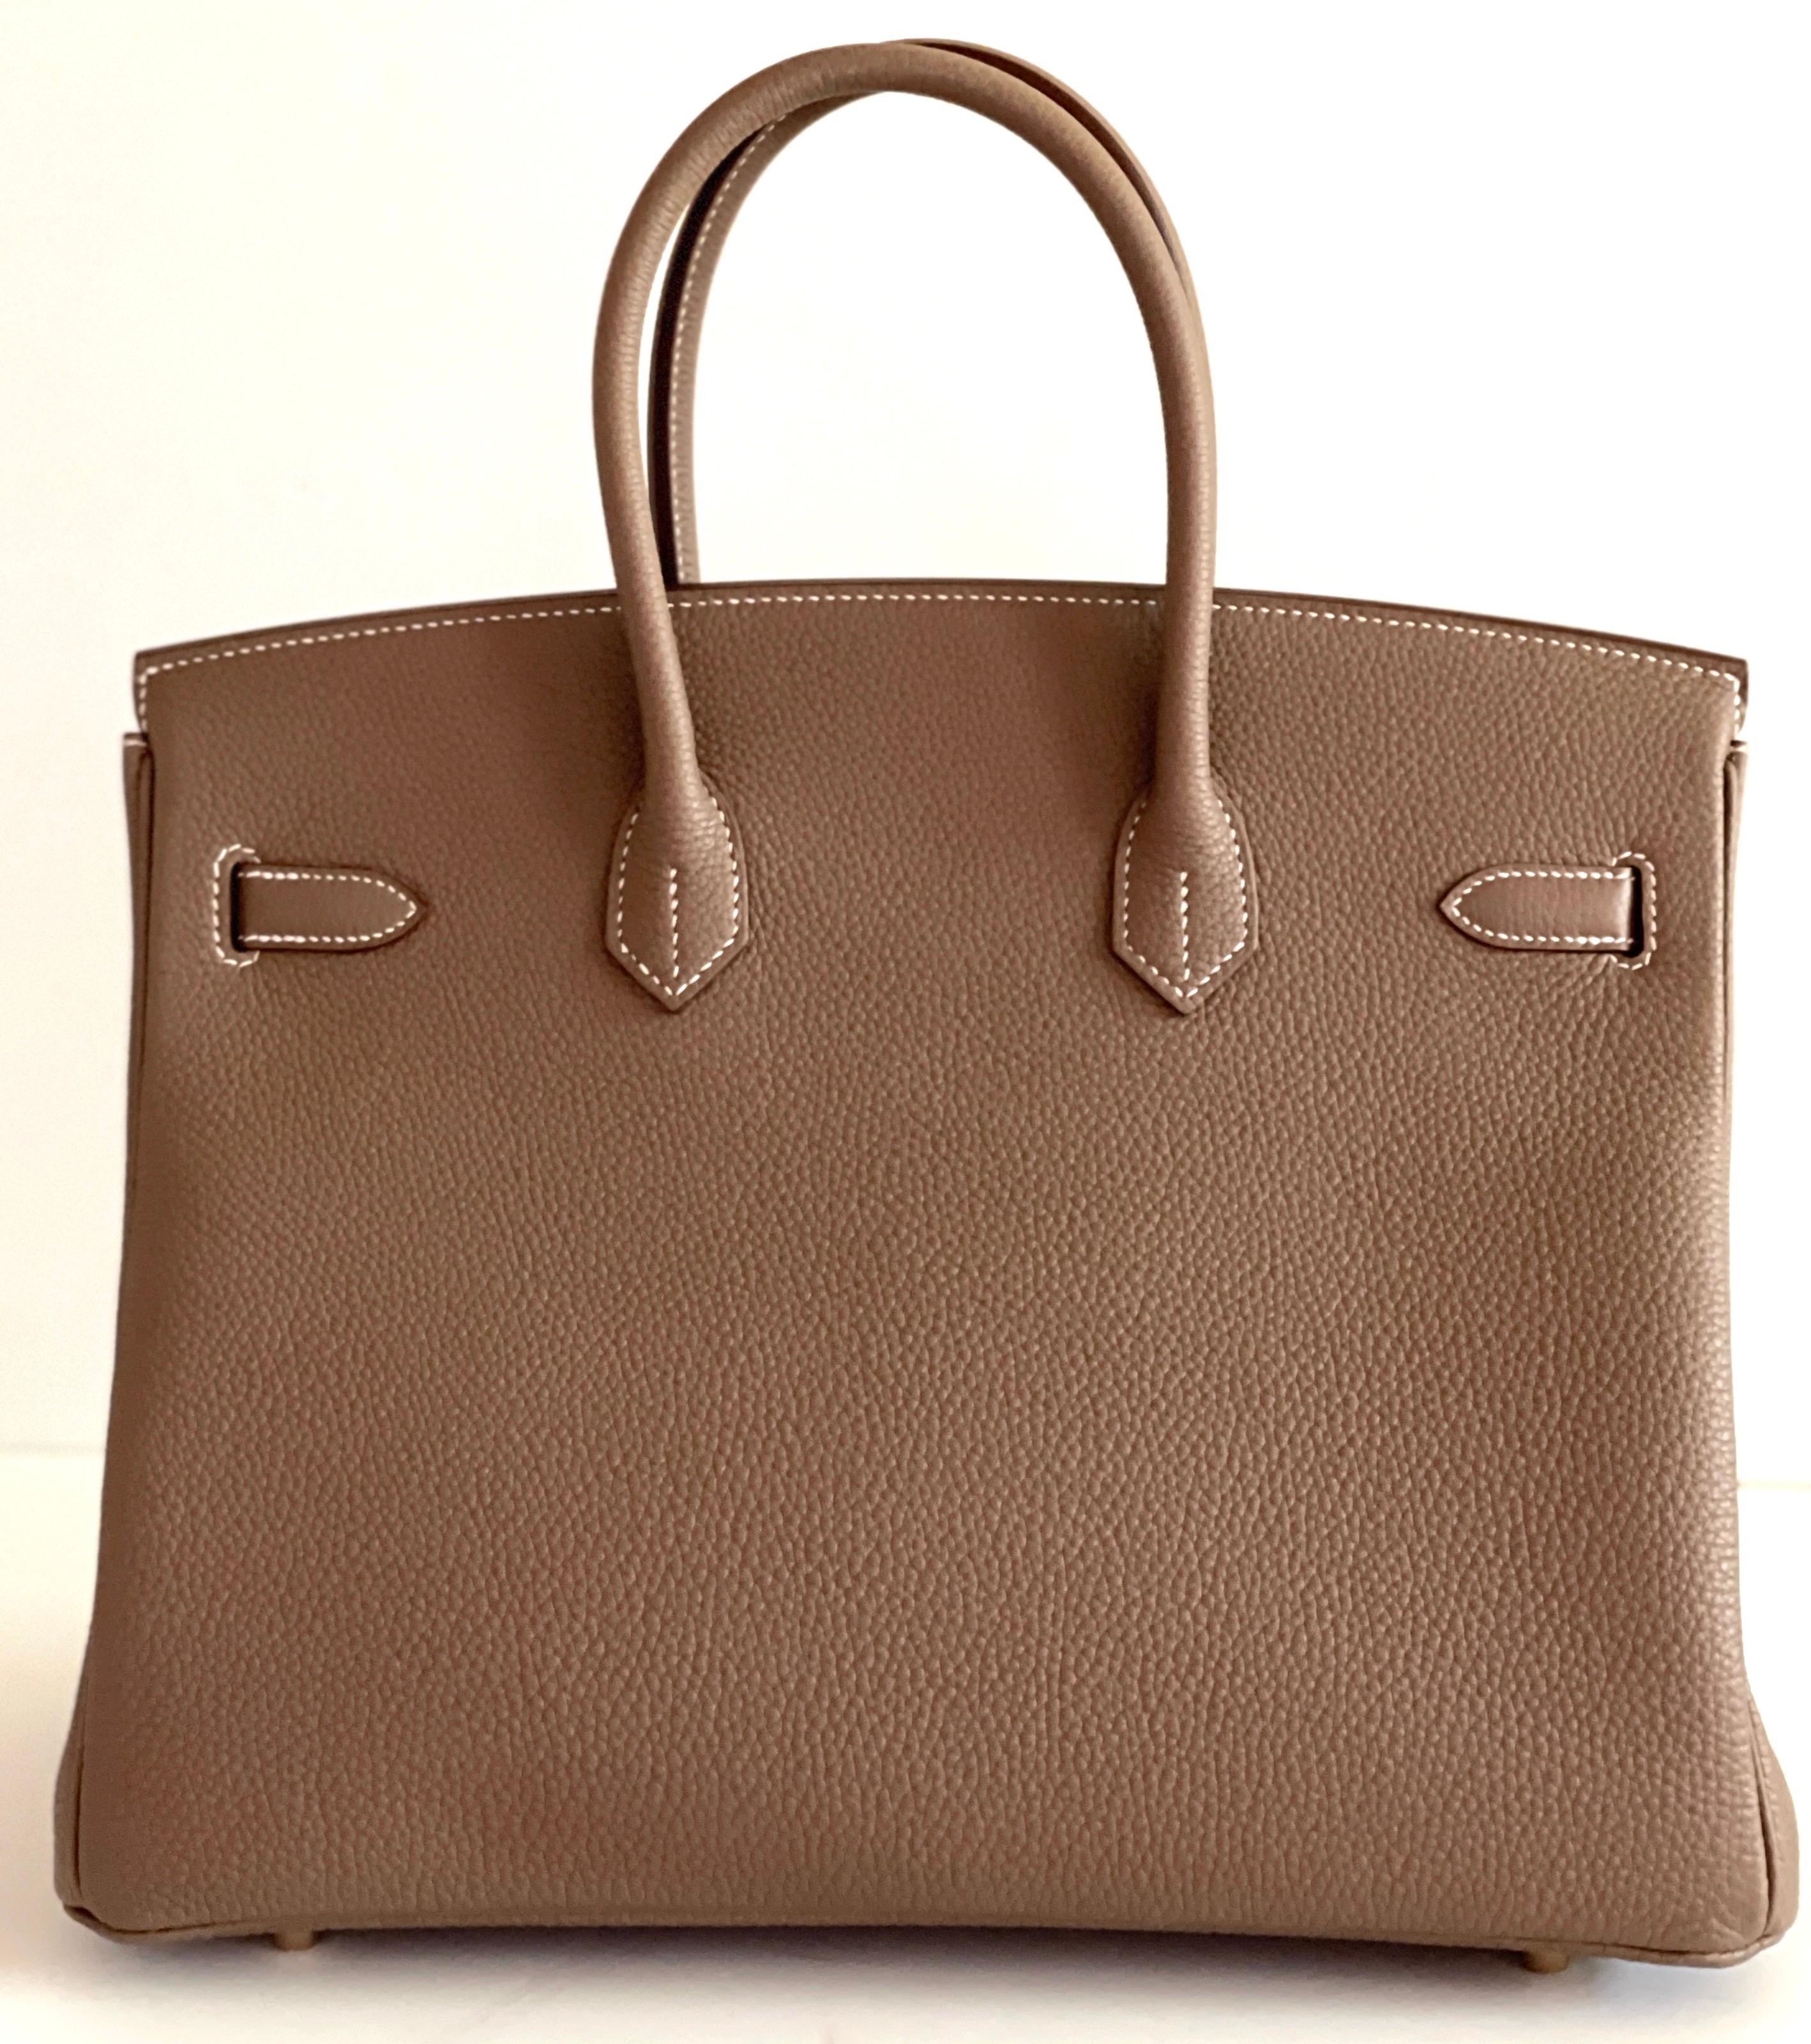 HERMÈS
Togo Etoupe  Birkin 35
Etoupe togo with contrasting white top stitching detail
 
Description
Hermes 35cm Birkin Etoupe, always a favorite with the Hermes Collector, and one of the first colors collected!

Gold Hardware

Togo Leather love by